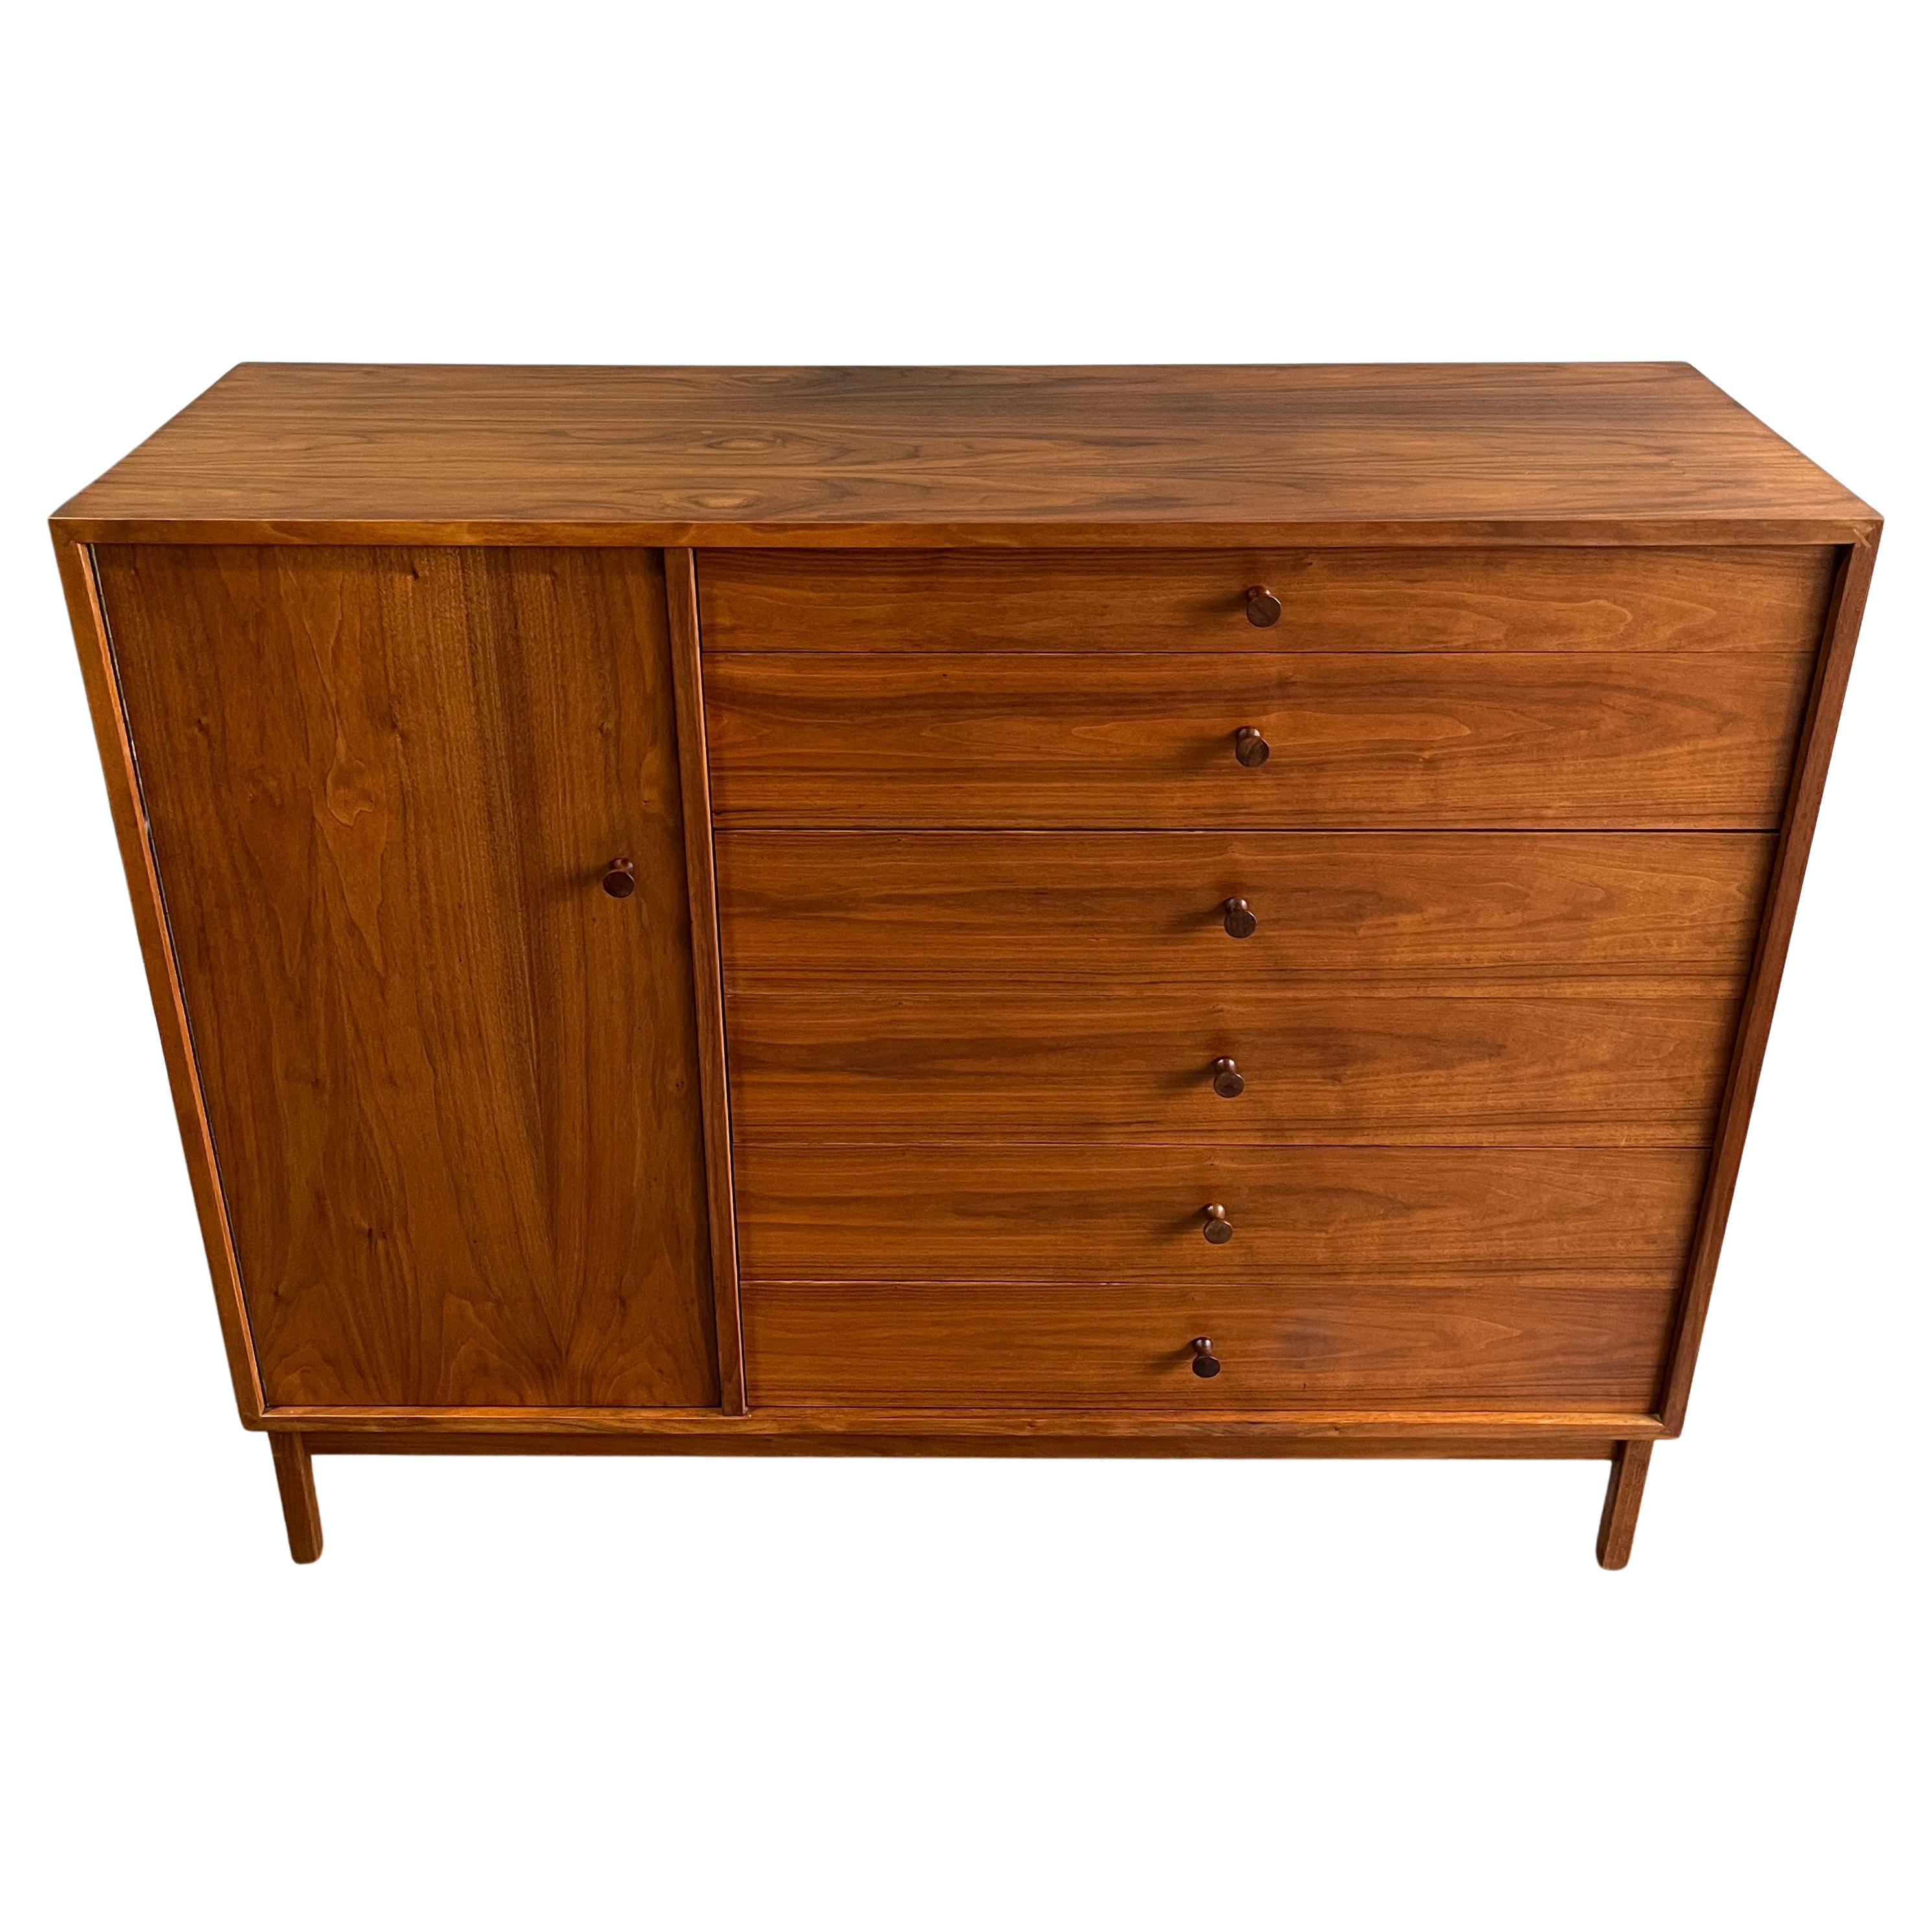 Artist Richard Artschwager (NY 1923-2013). Fine high-boy cabinet in walnut. An iconic piece of mid century furniture design. Featuring 6 dovetailed drawers and one cabinet with three adjustable shelves. Artschwager started his career designing and